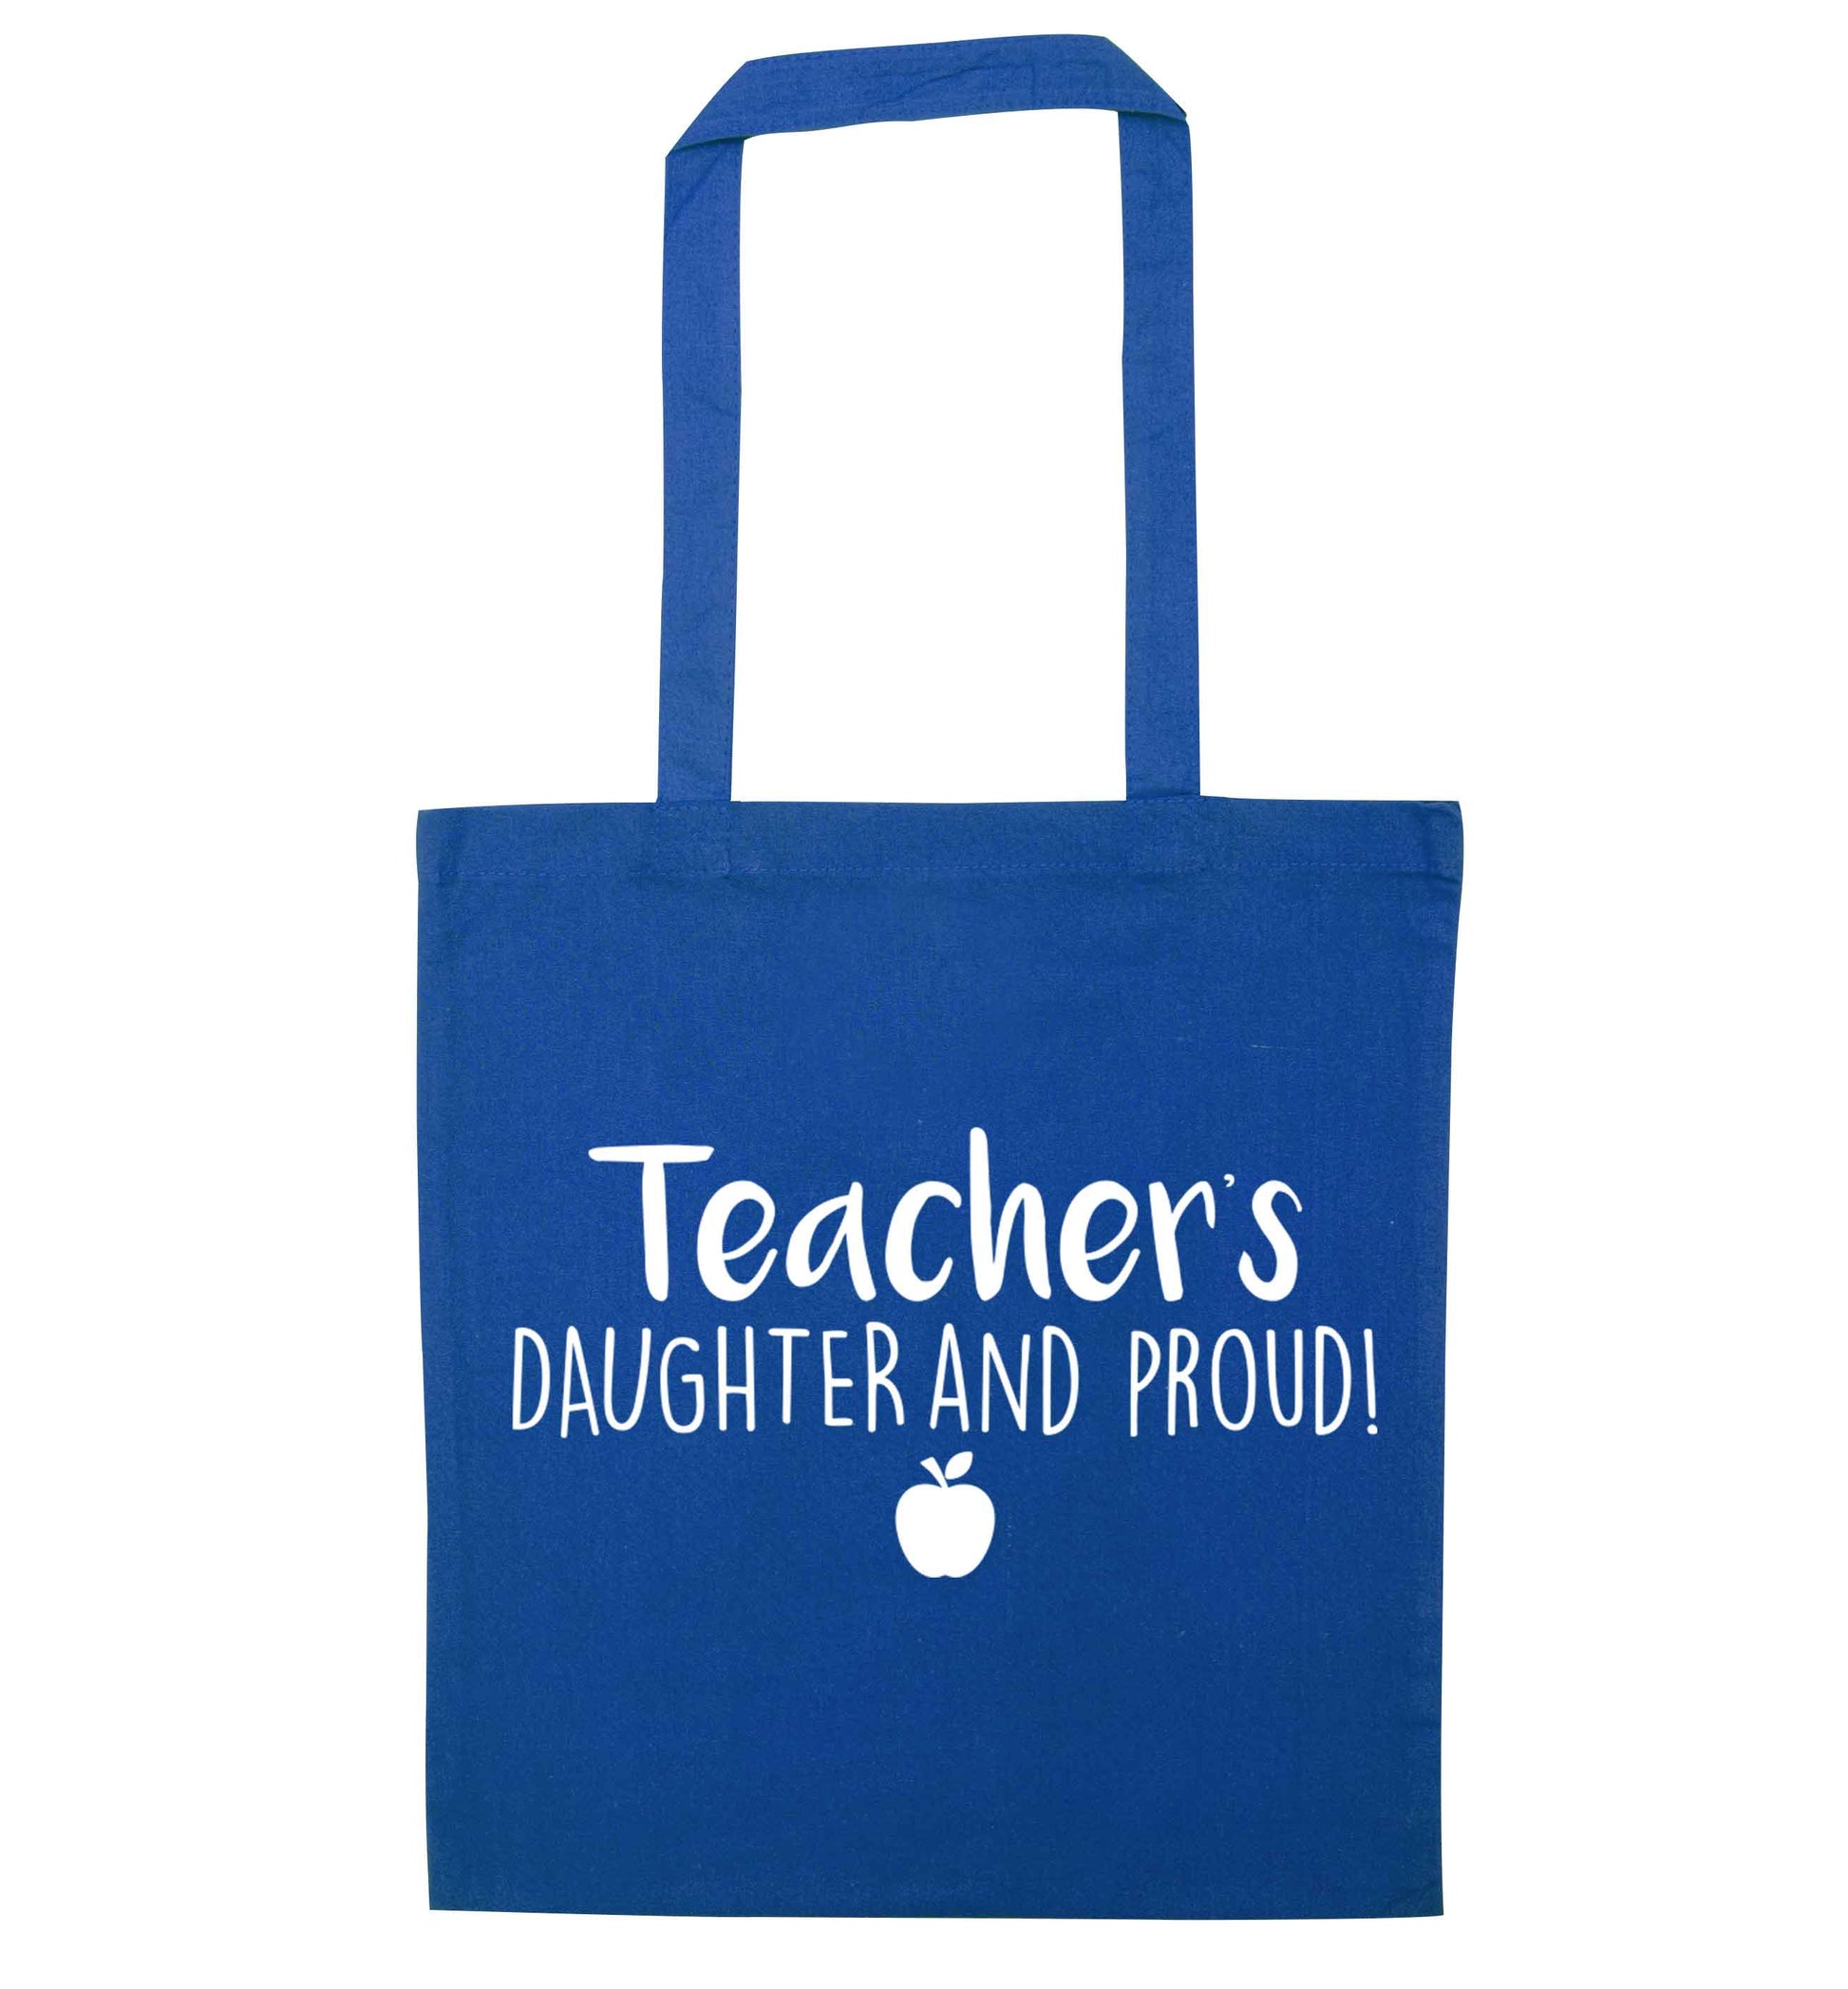 Teachers daughter and proud blue tote bag